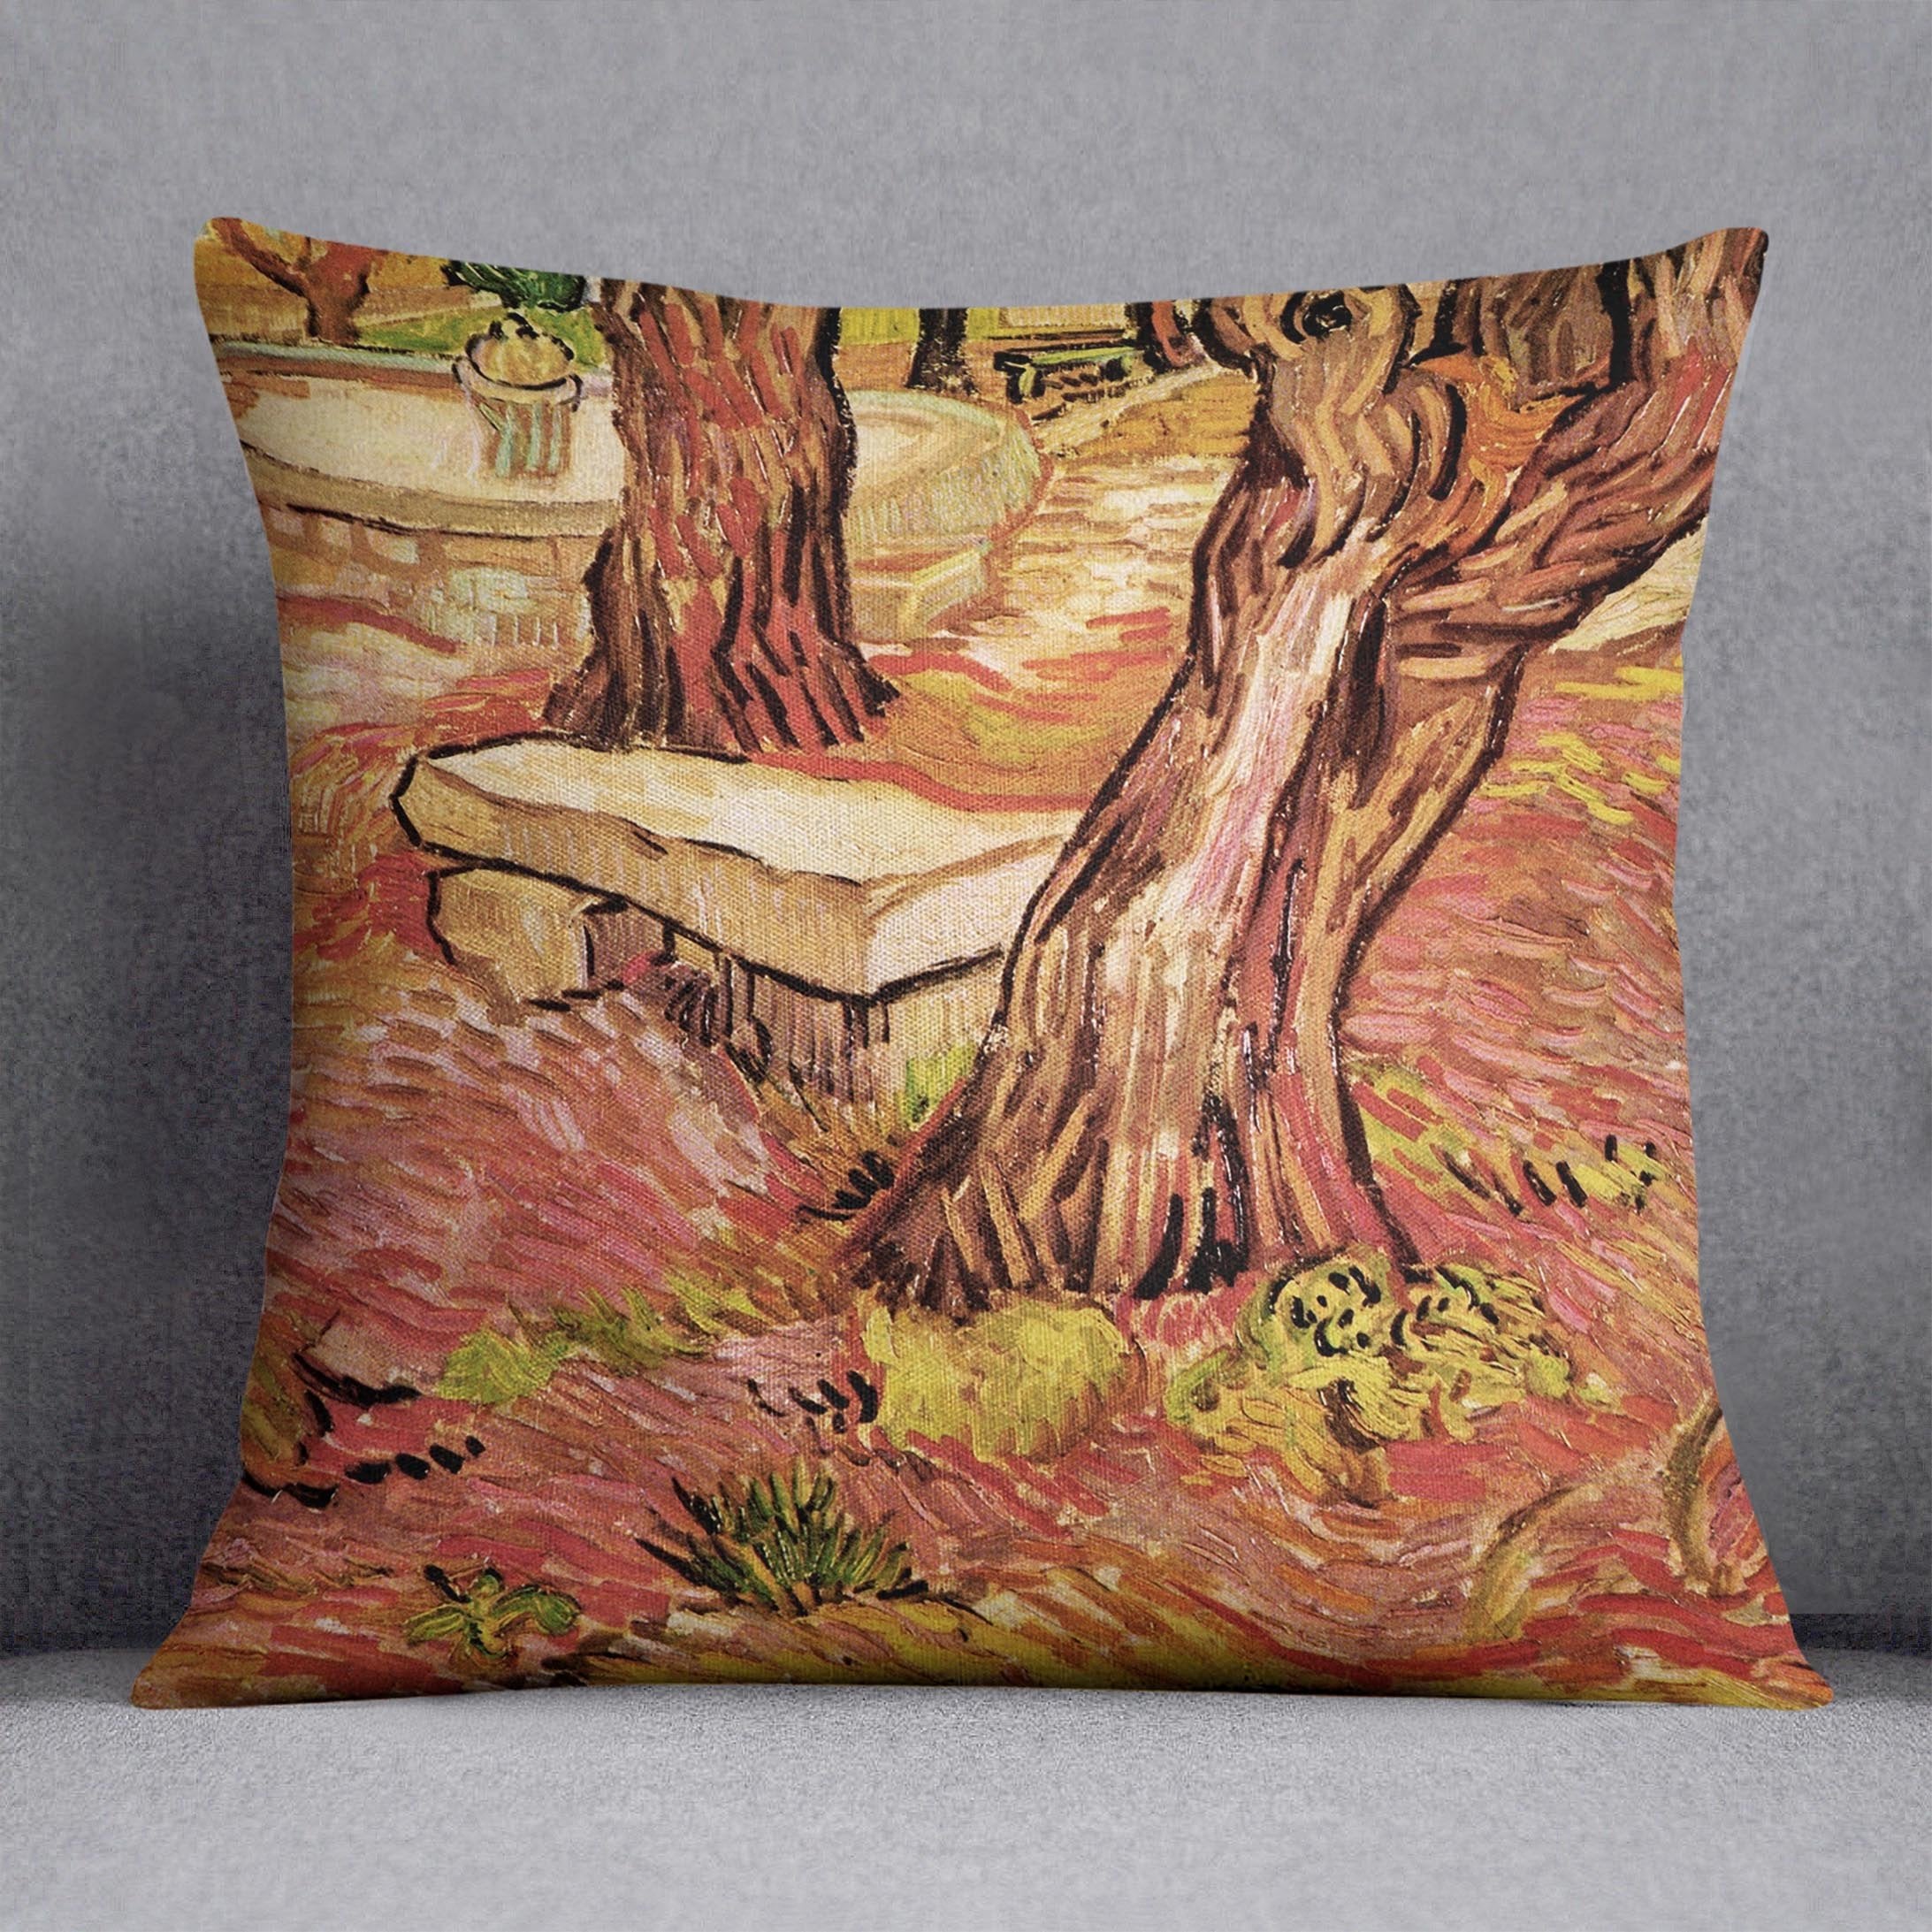 The Stone Bench in the Garden of Saint-Paul Hospital by Van Gogh Throw Pillow